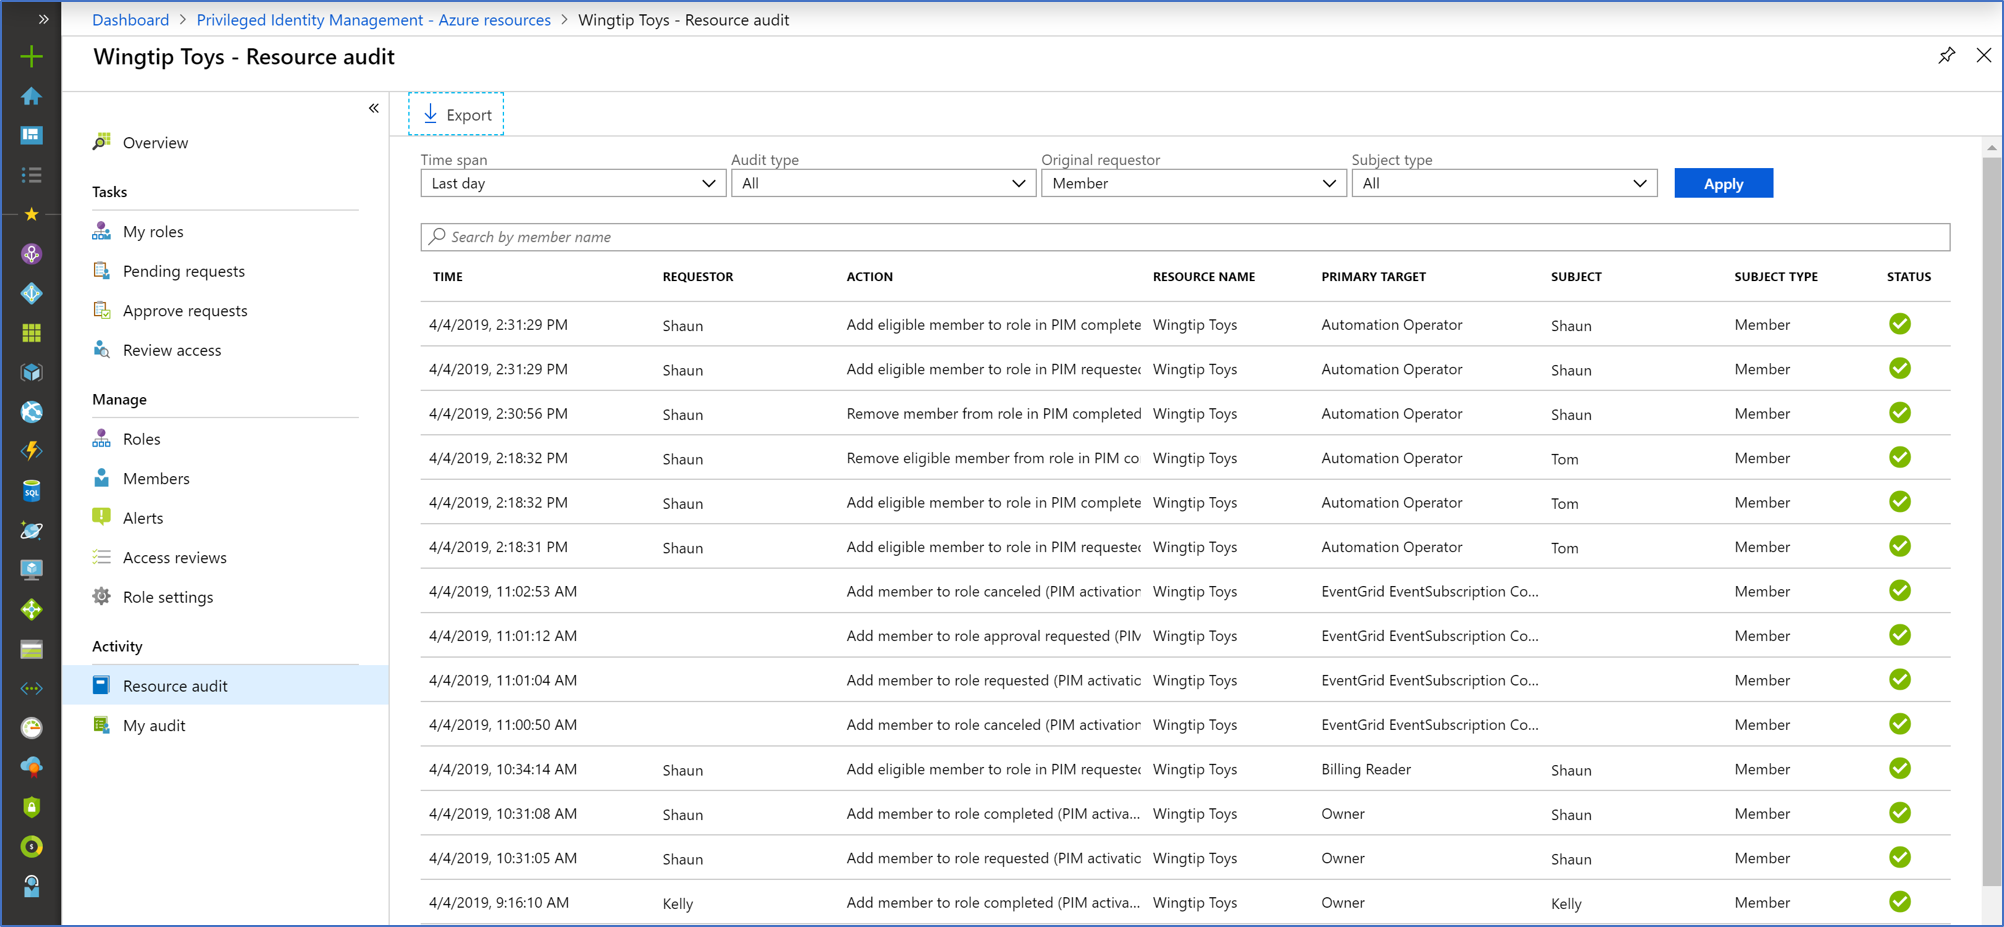 Azure AD role audit list with filters